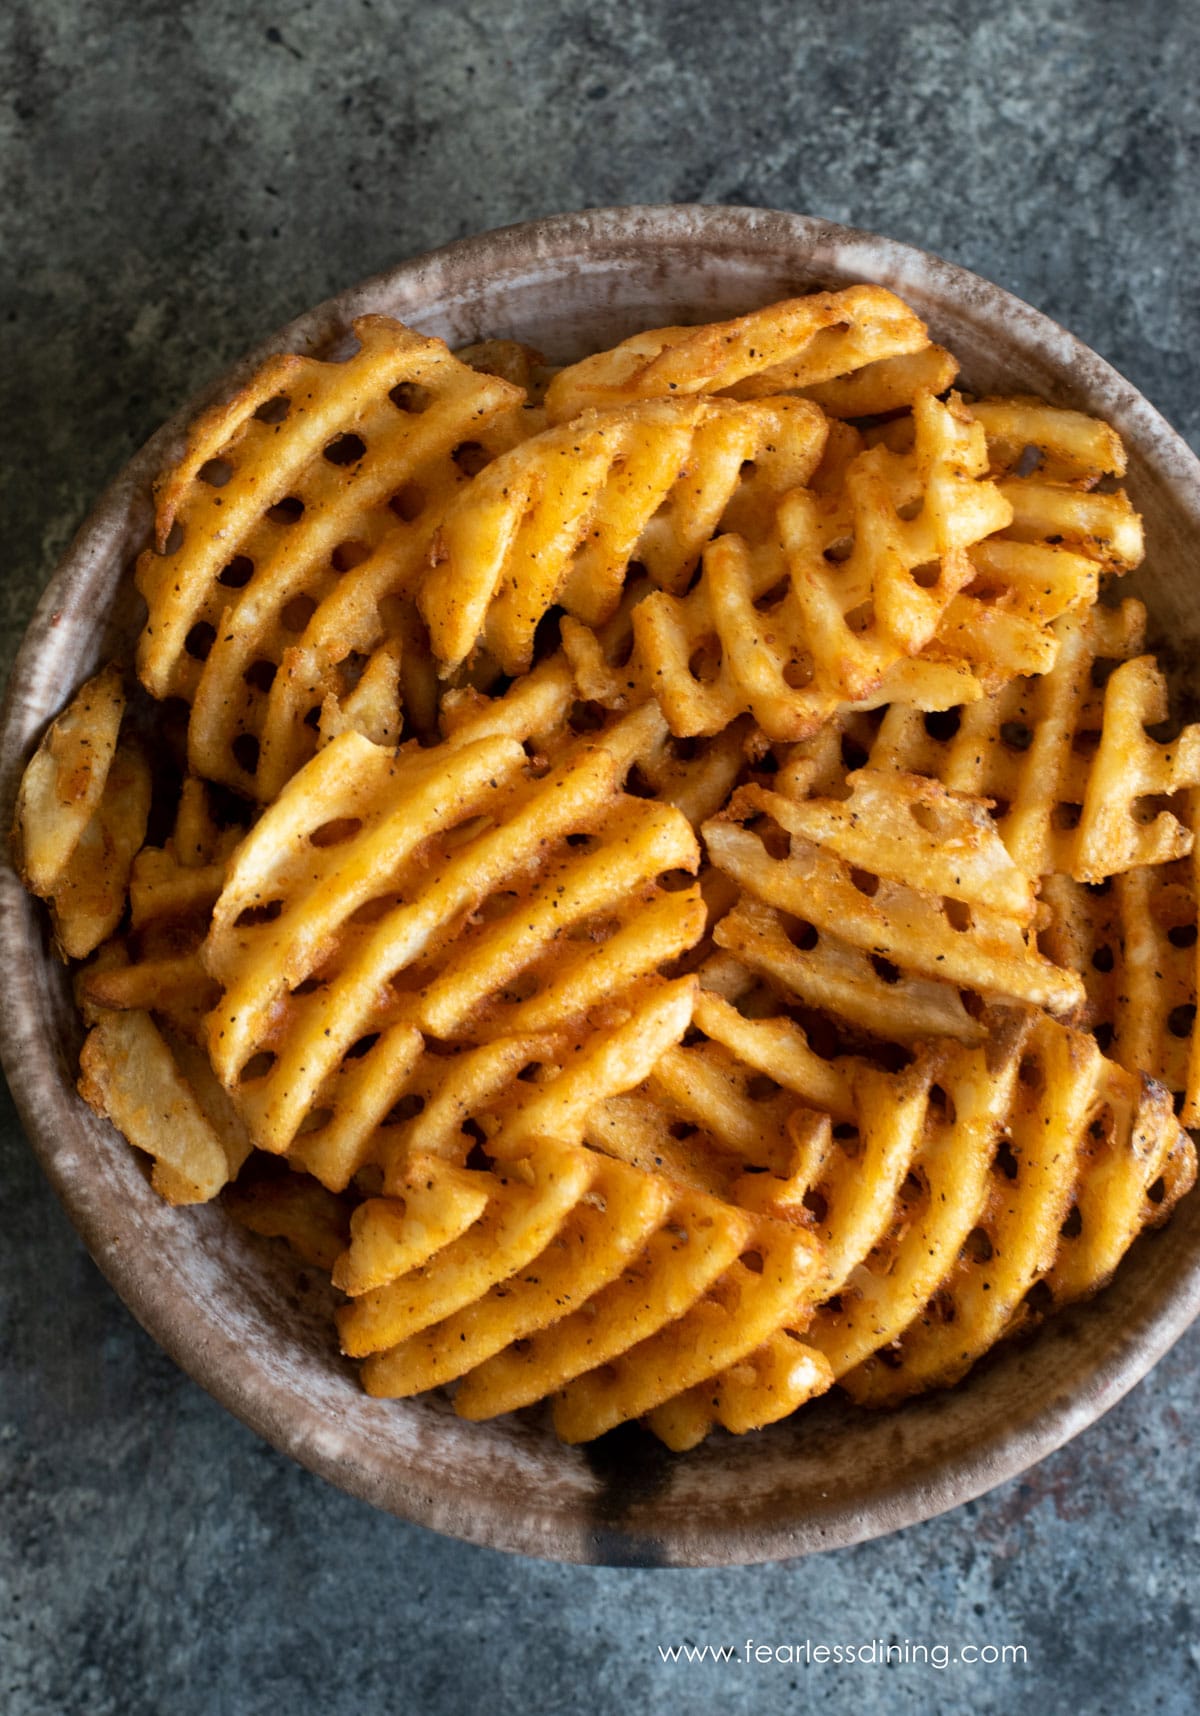 a top view of a large bowl of waffle fries.